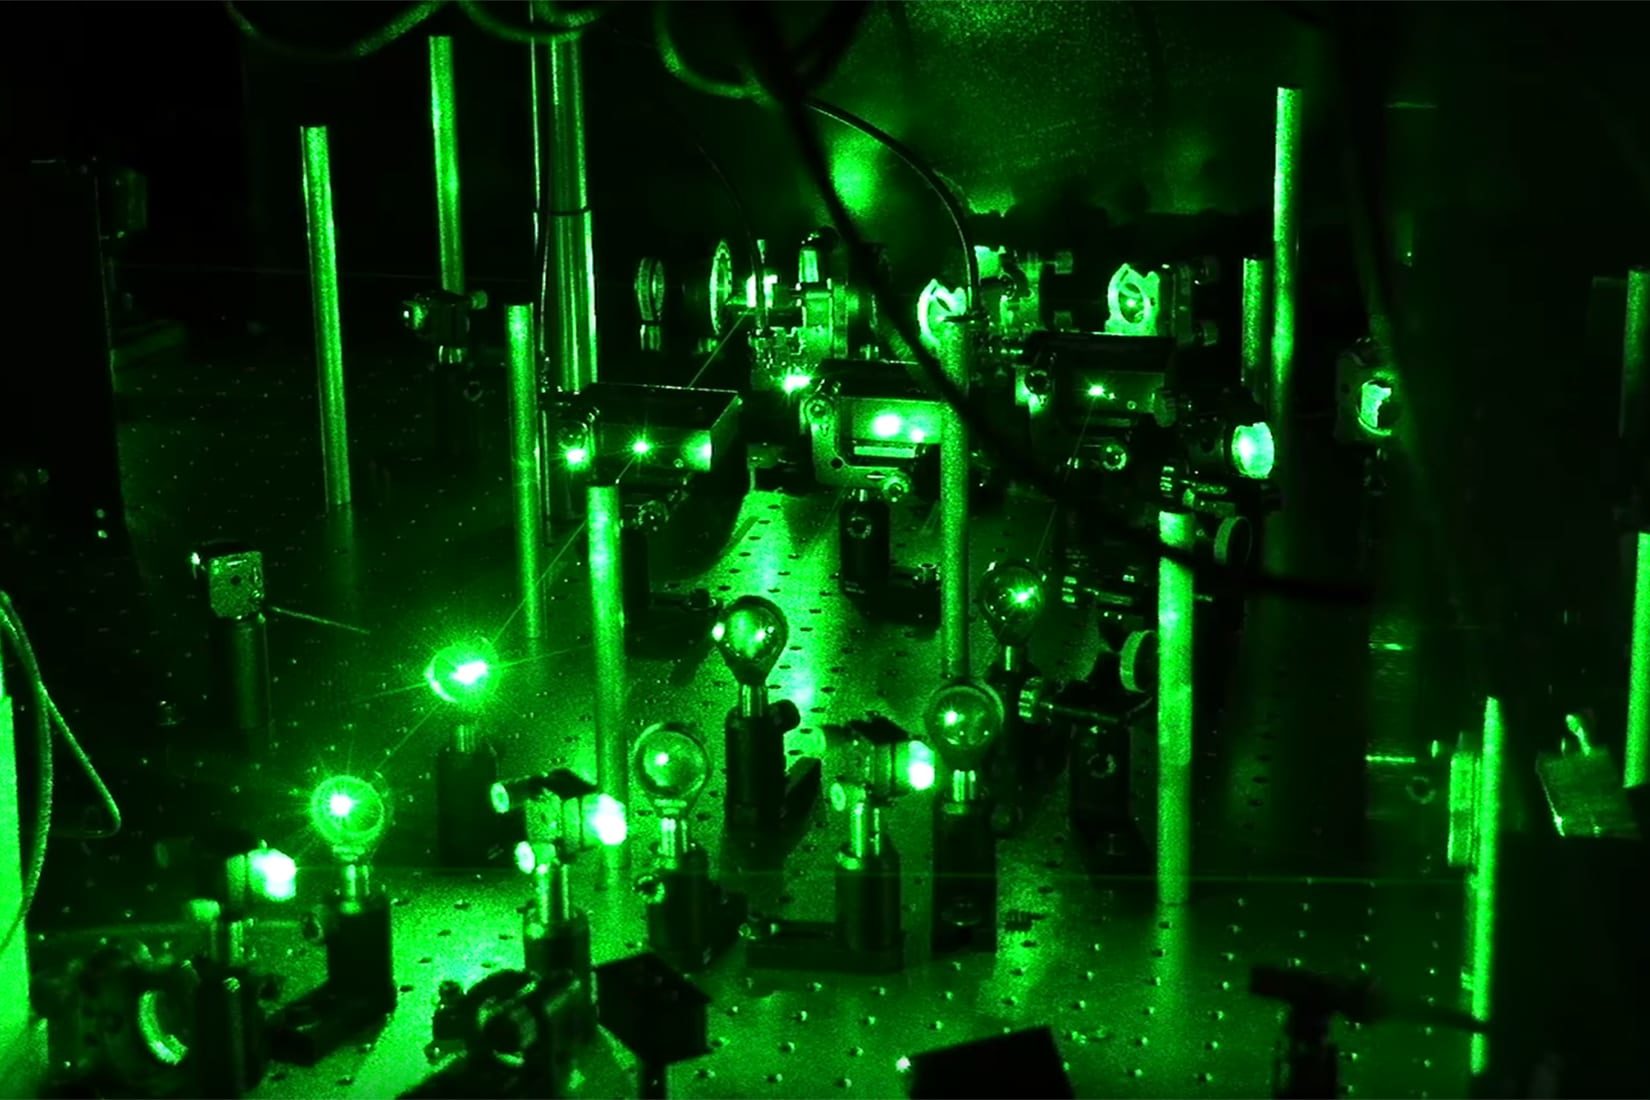 Ultracold lithium atoms